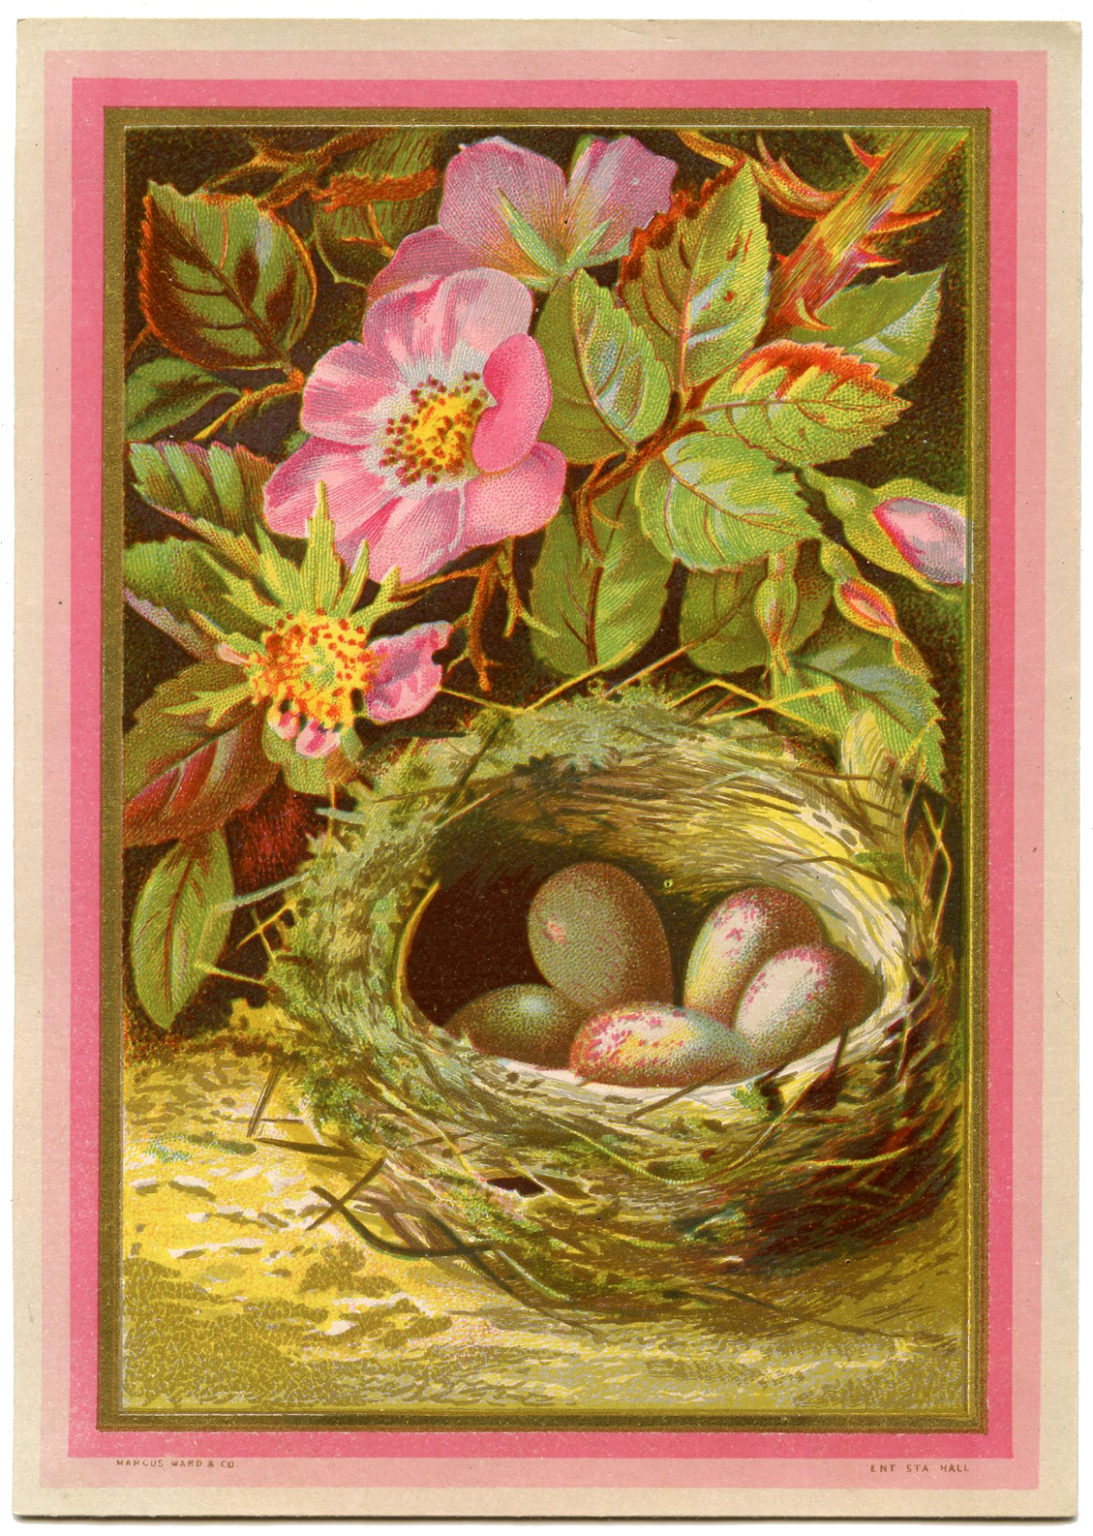 11 Bird Nests with Flowers Images! - The Graphics Fairy